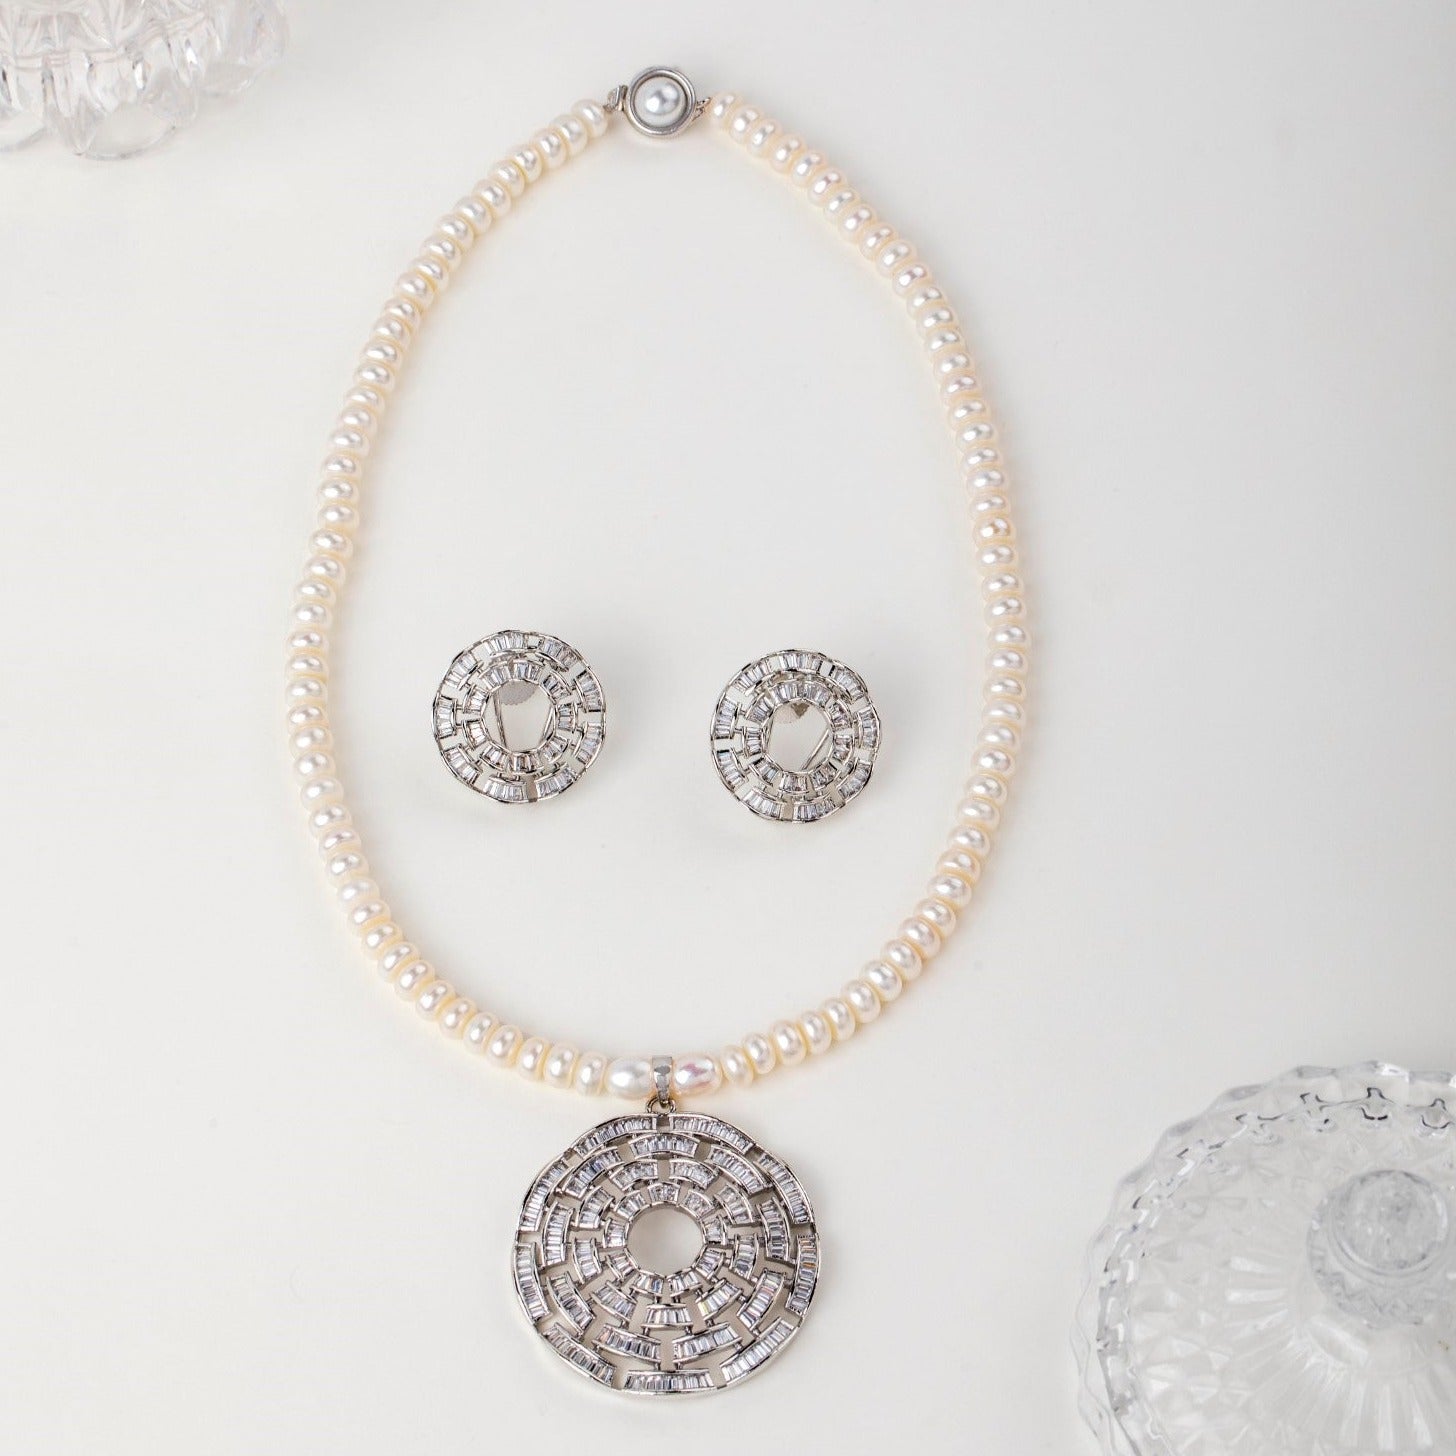 Shimmering Constellation Pearl Necklace and earring set